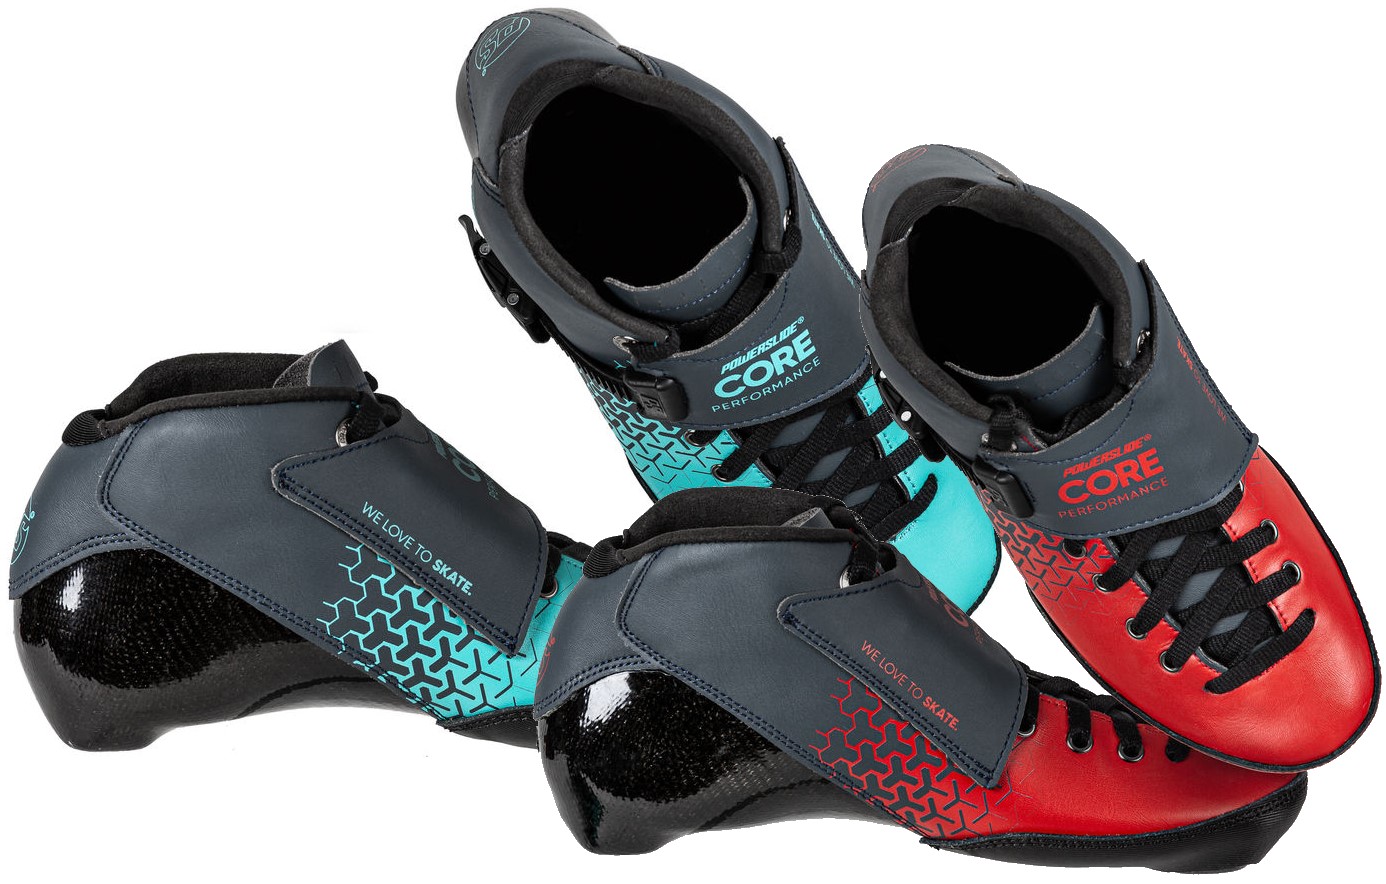 Powerslide Core Performance Race inline skate boot in red or teal colour for kids